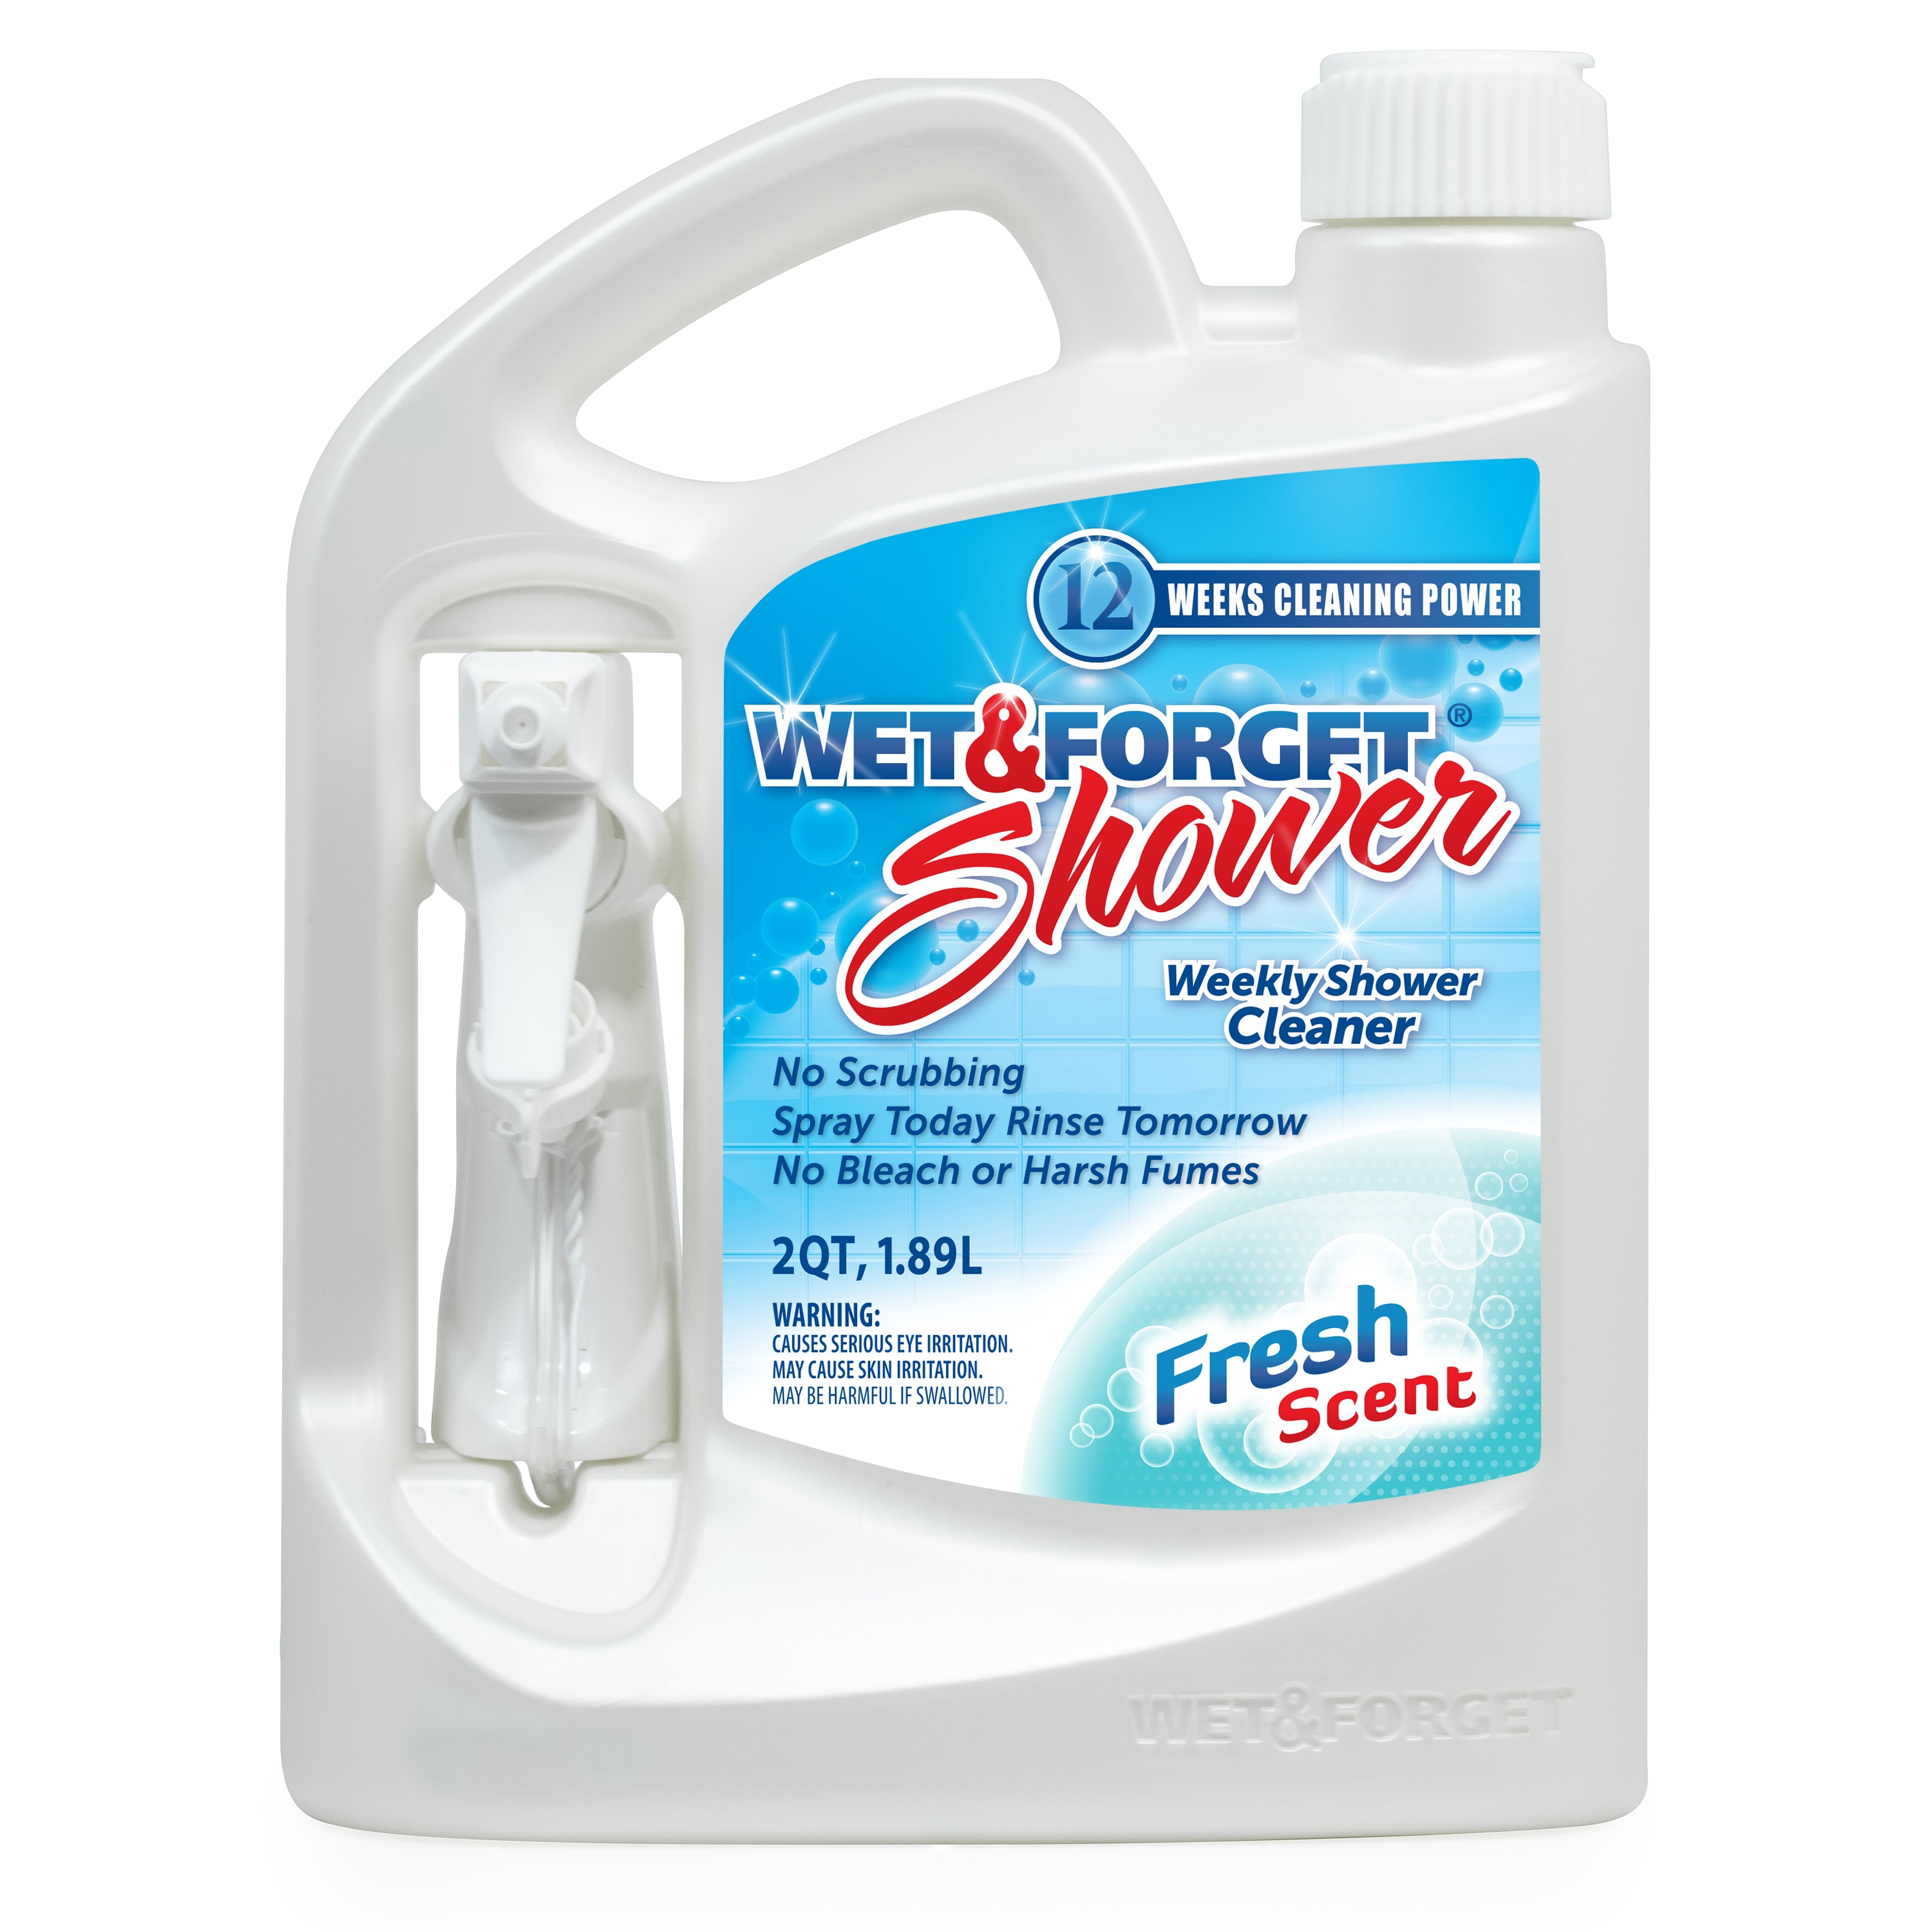 Wet and Forget Shower Cleaner & Bathroom Cleaner Spray- Bathtub Cleaner-  Tile Cleaner- Shower Glass Cleaner- Bundled w/ Sponge and Grout Cleaner